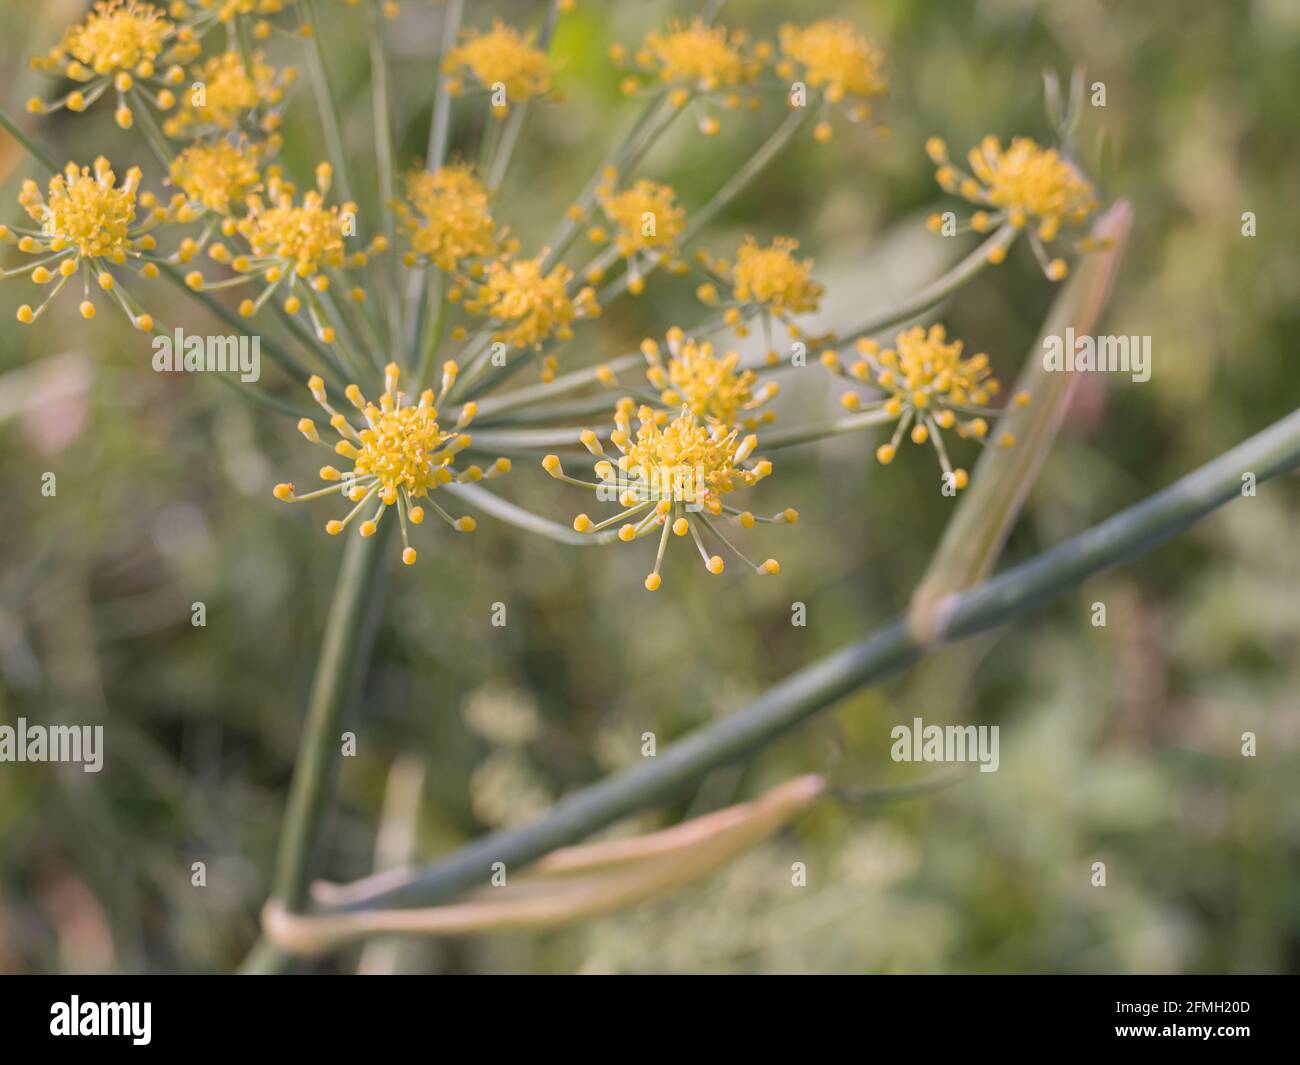 close up view of dill plant flowers with daylight in summer outdoors Anethum graveolens Stock Photo